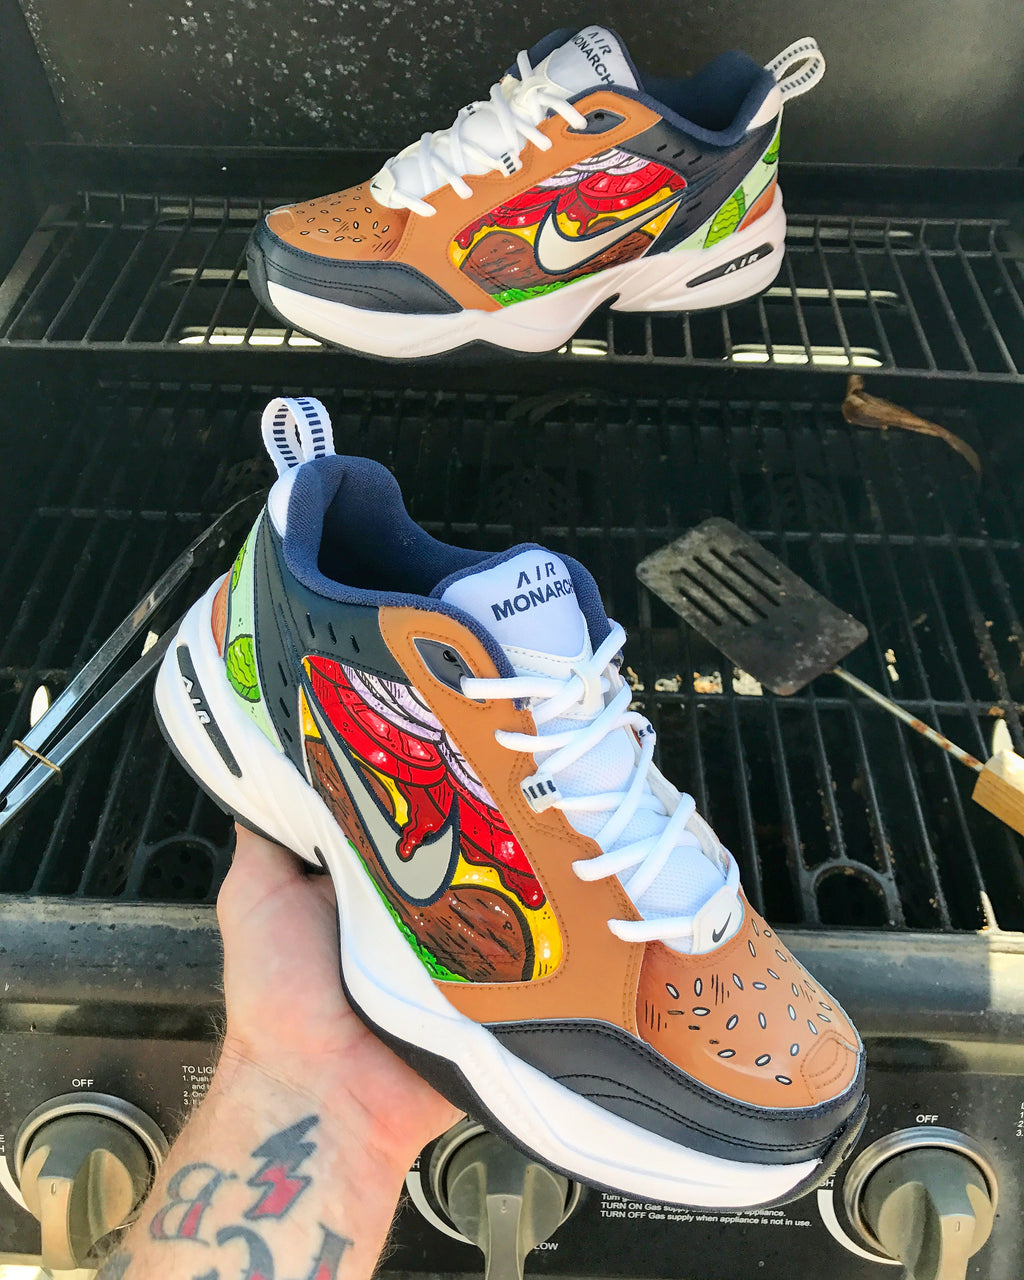 Dads Ultimate Grillin' & Chillin' - Nike Air Monarch shoes